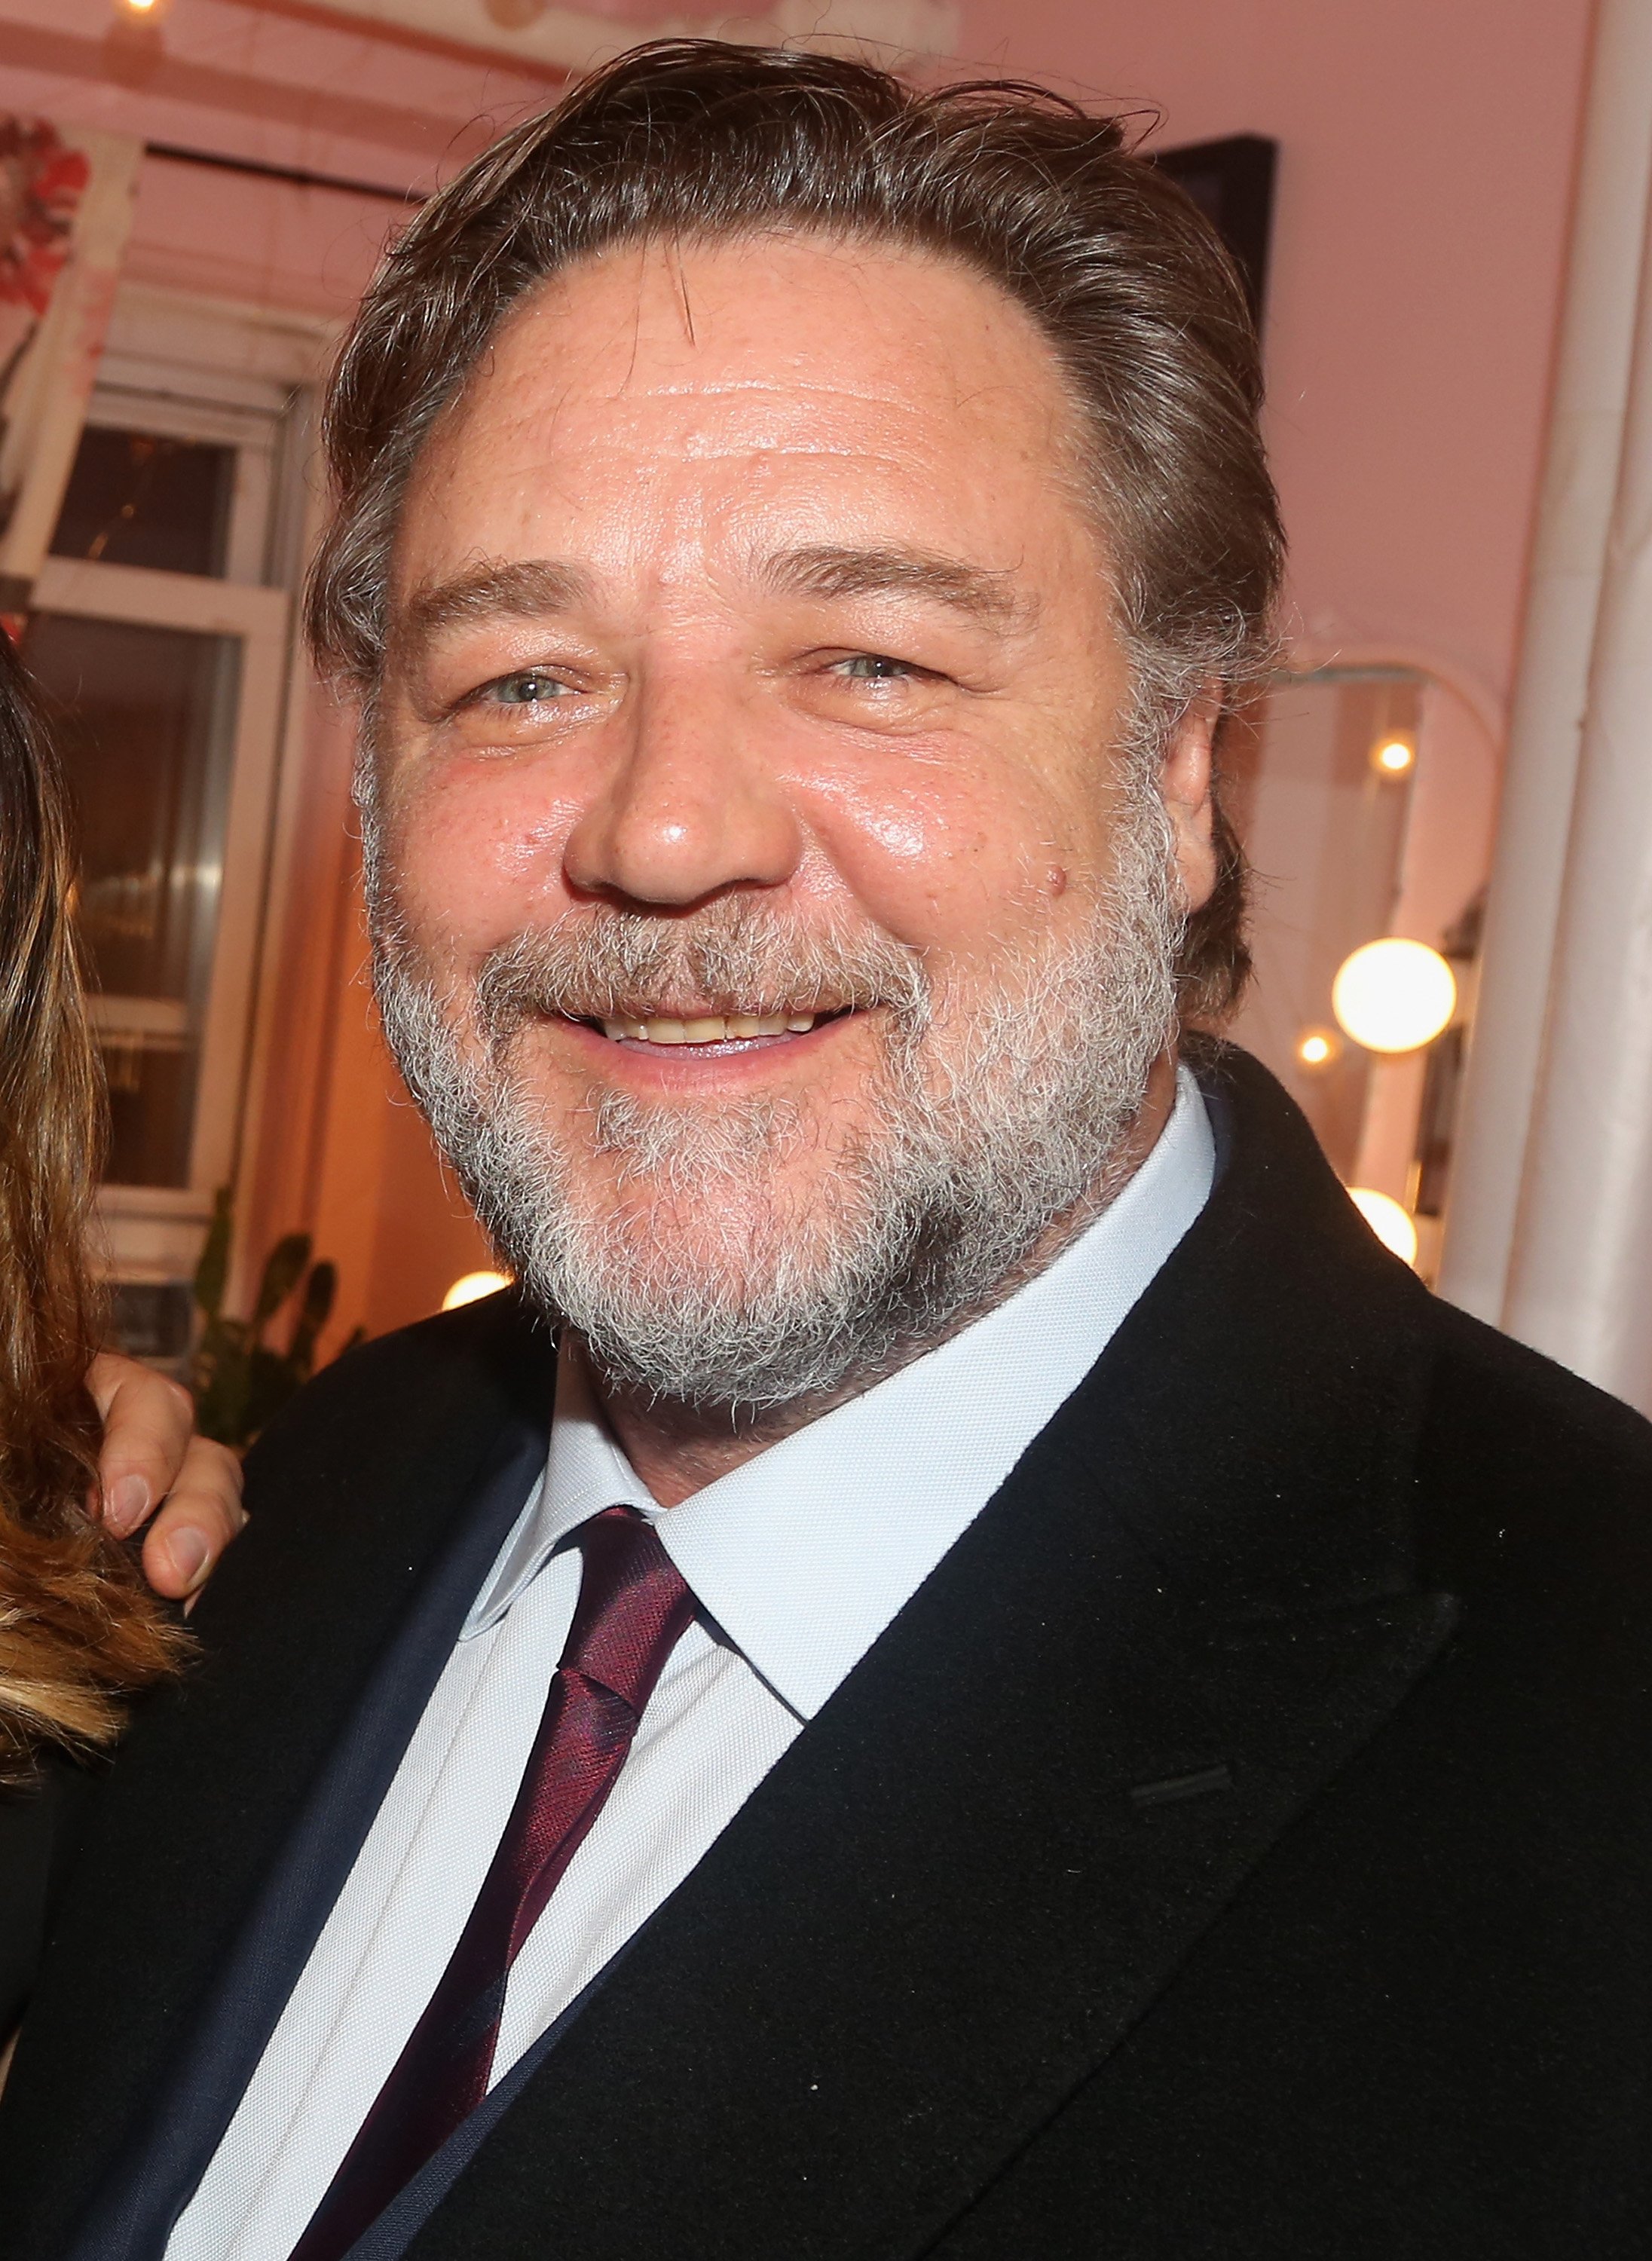 Russell Crowe poses backstage at the hit musical based on the film 